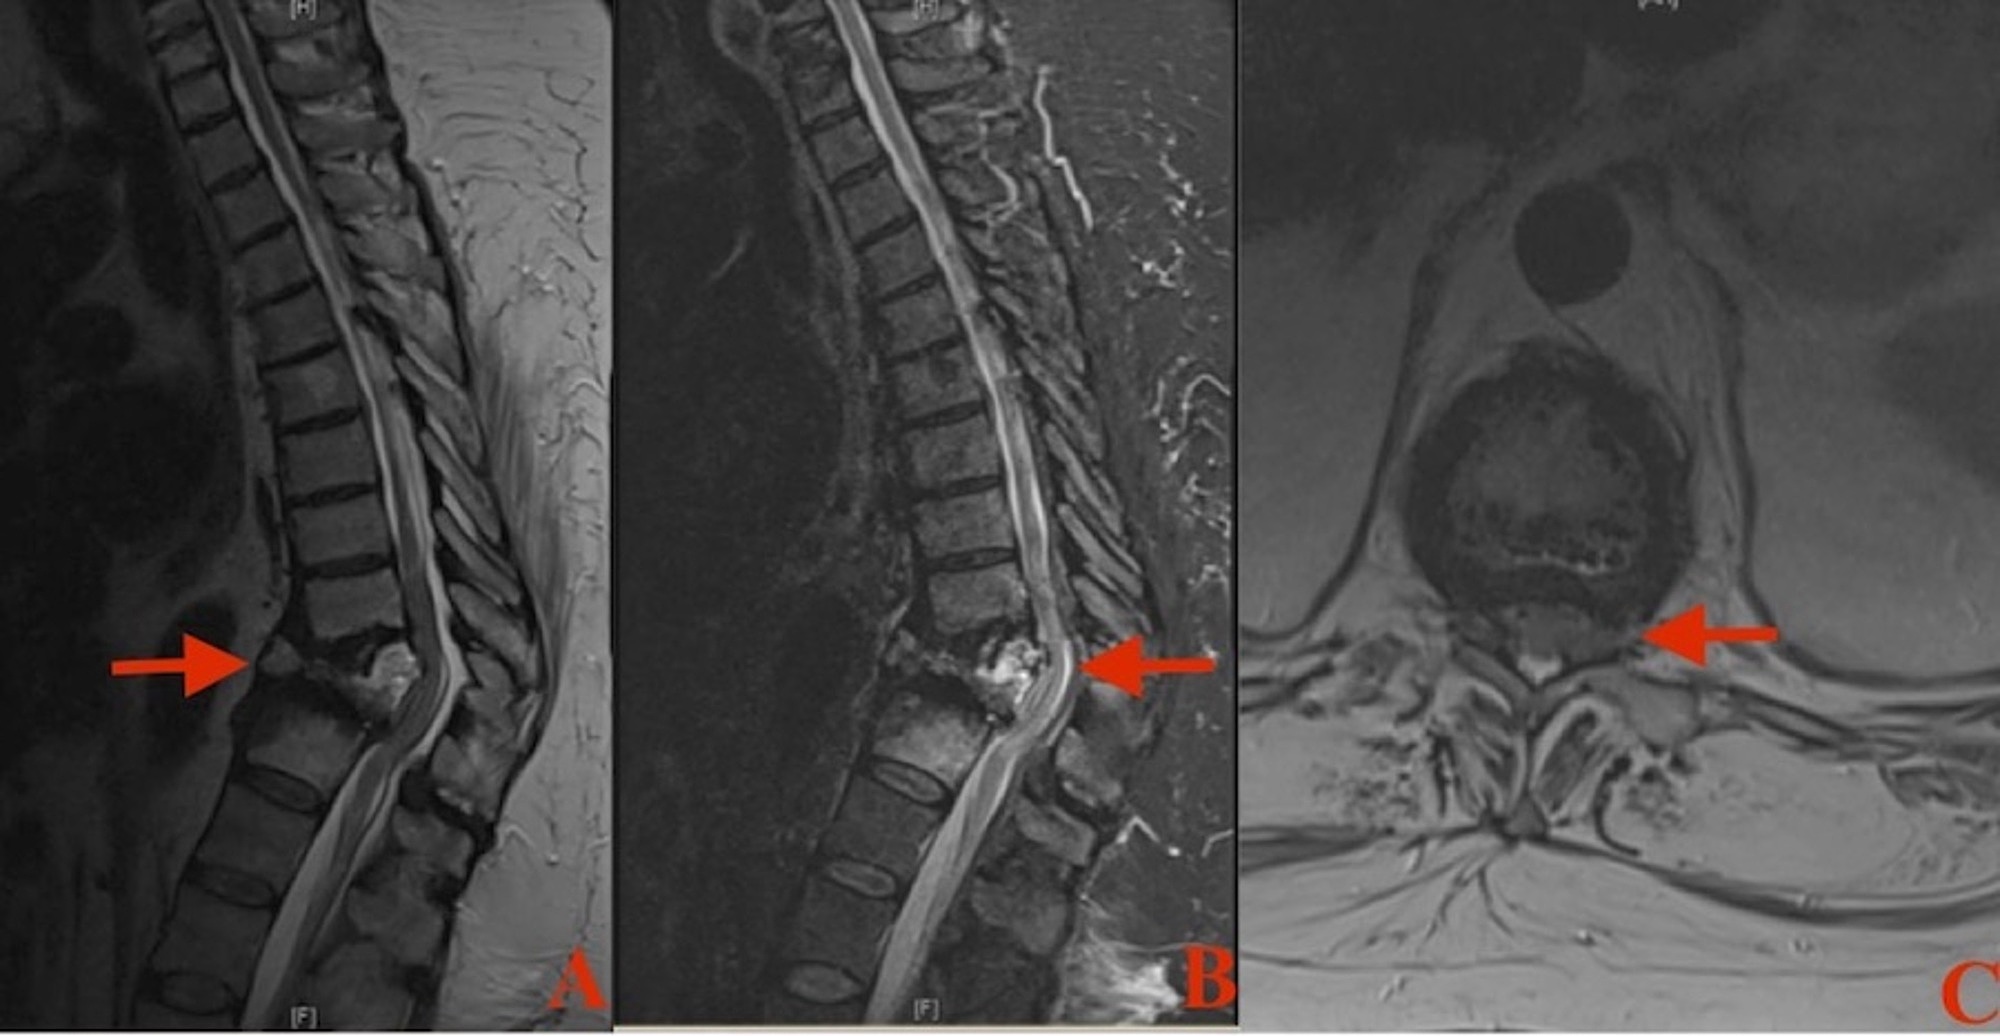 spinal compression fracture from fall